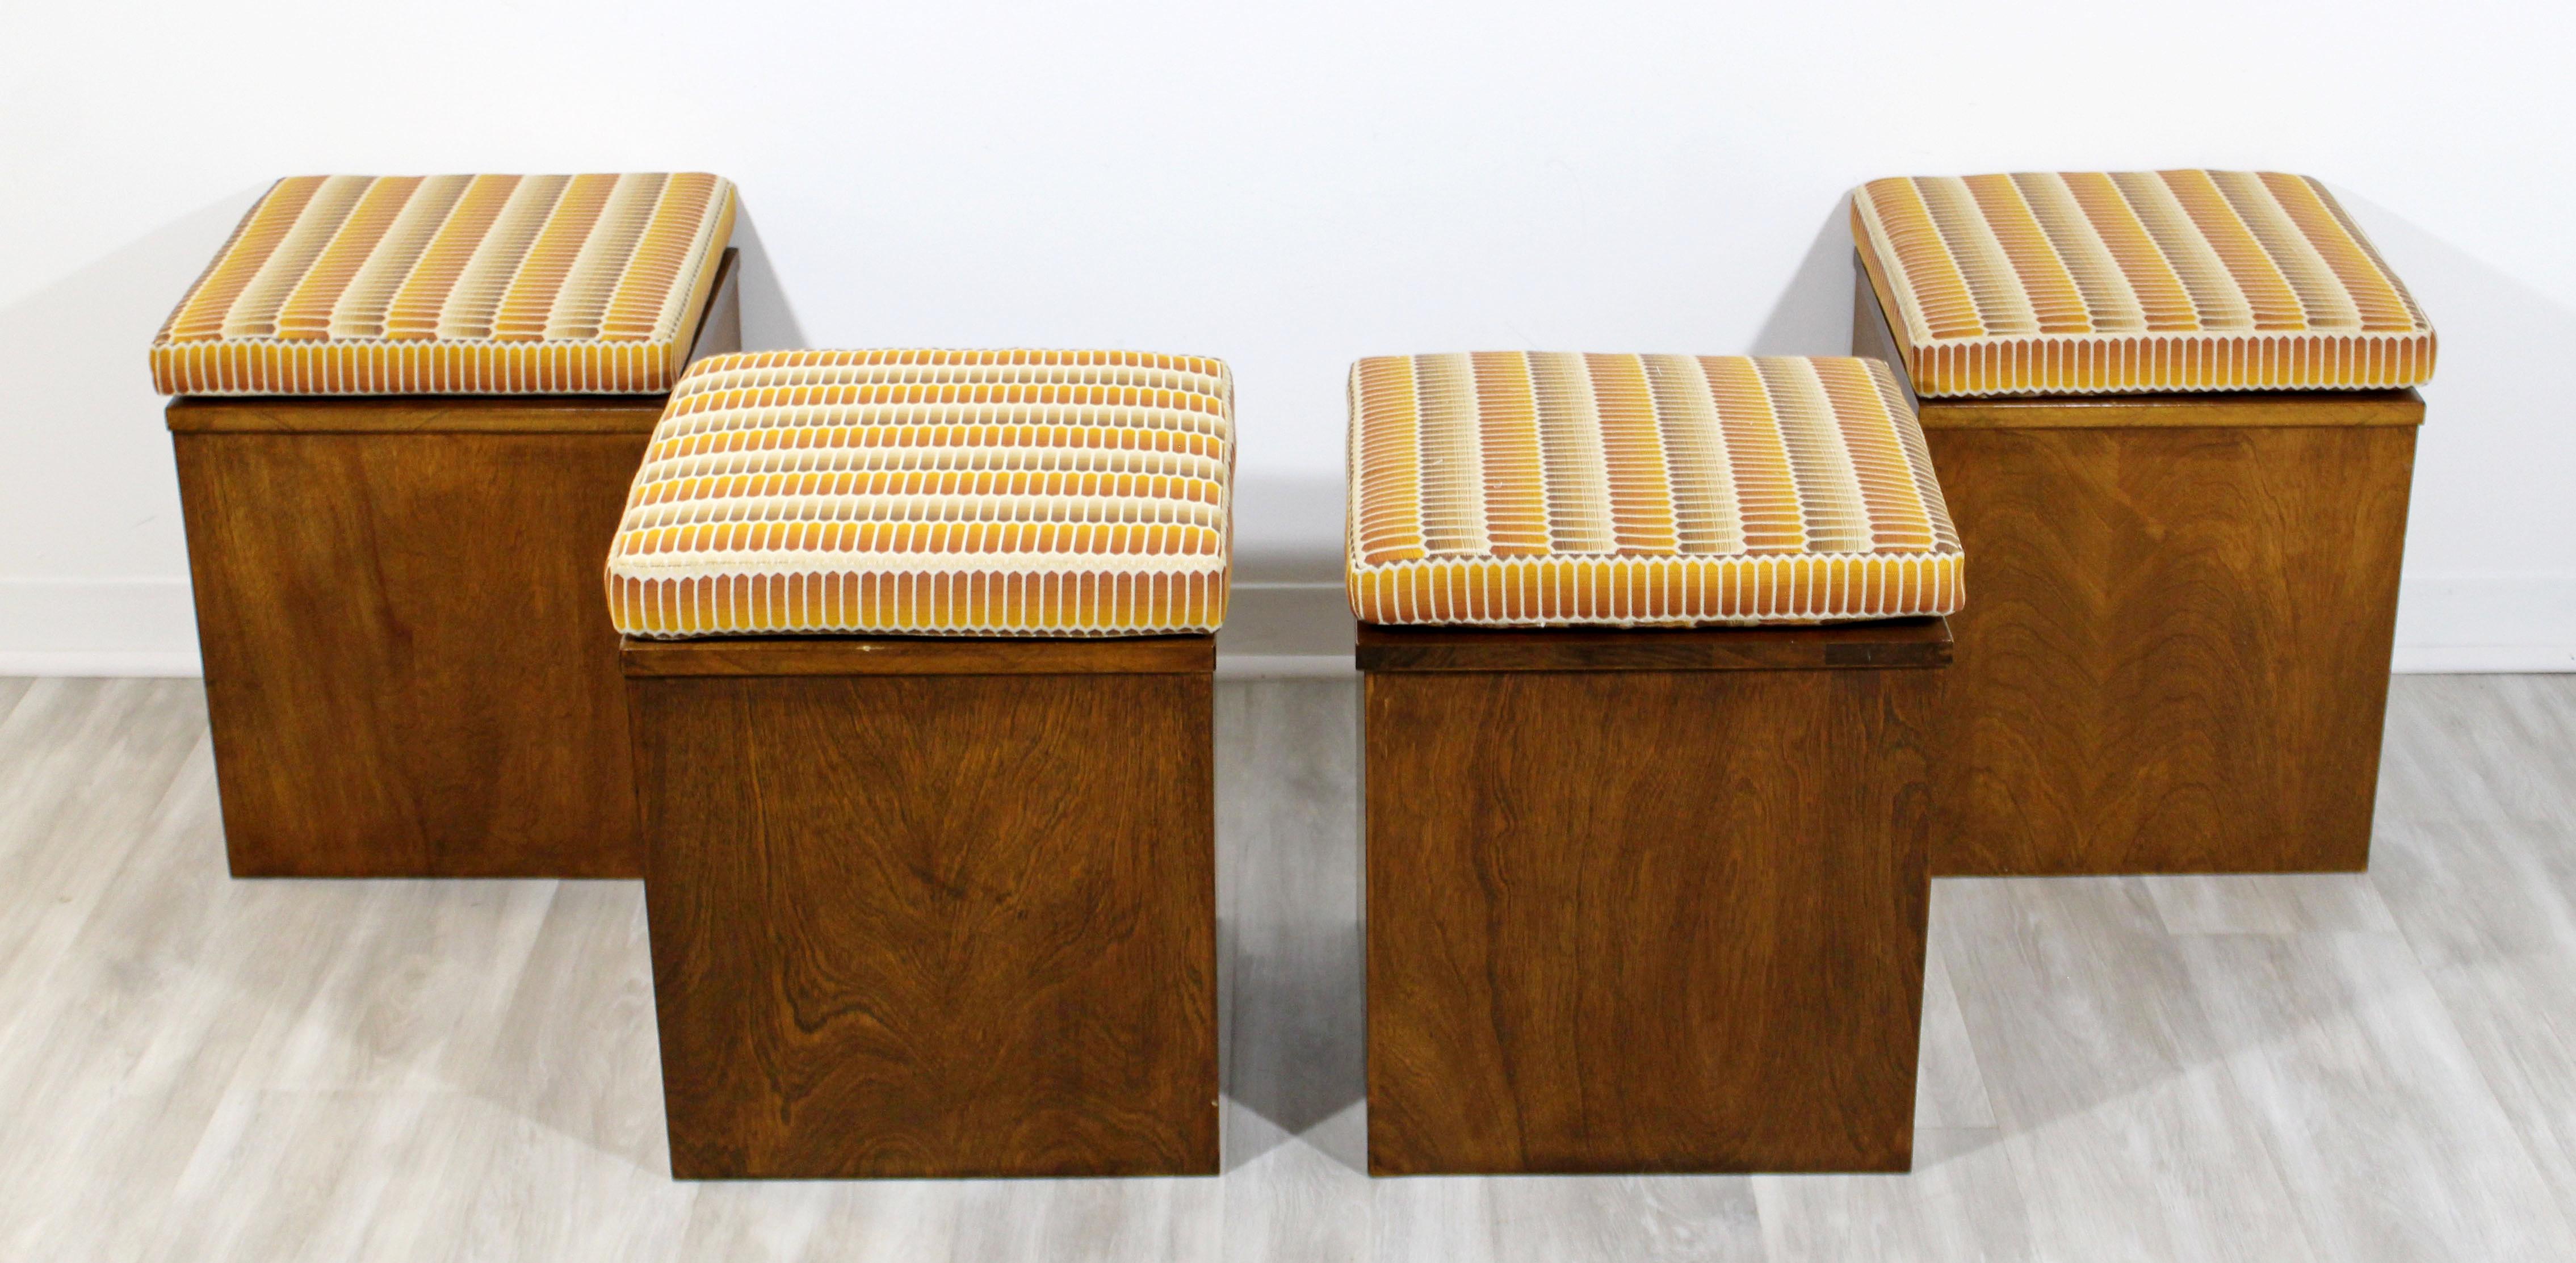 For your consideration is a gorgeous set of four, cube stools or ottomans, made of walnut and with orange patterned cushions, circa 1960s. In very good vintage condition. The dimensions are 16